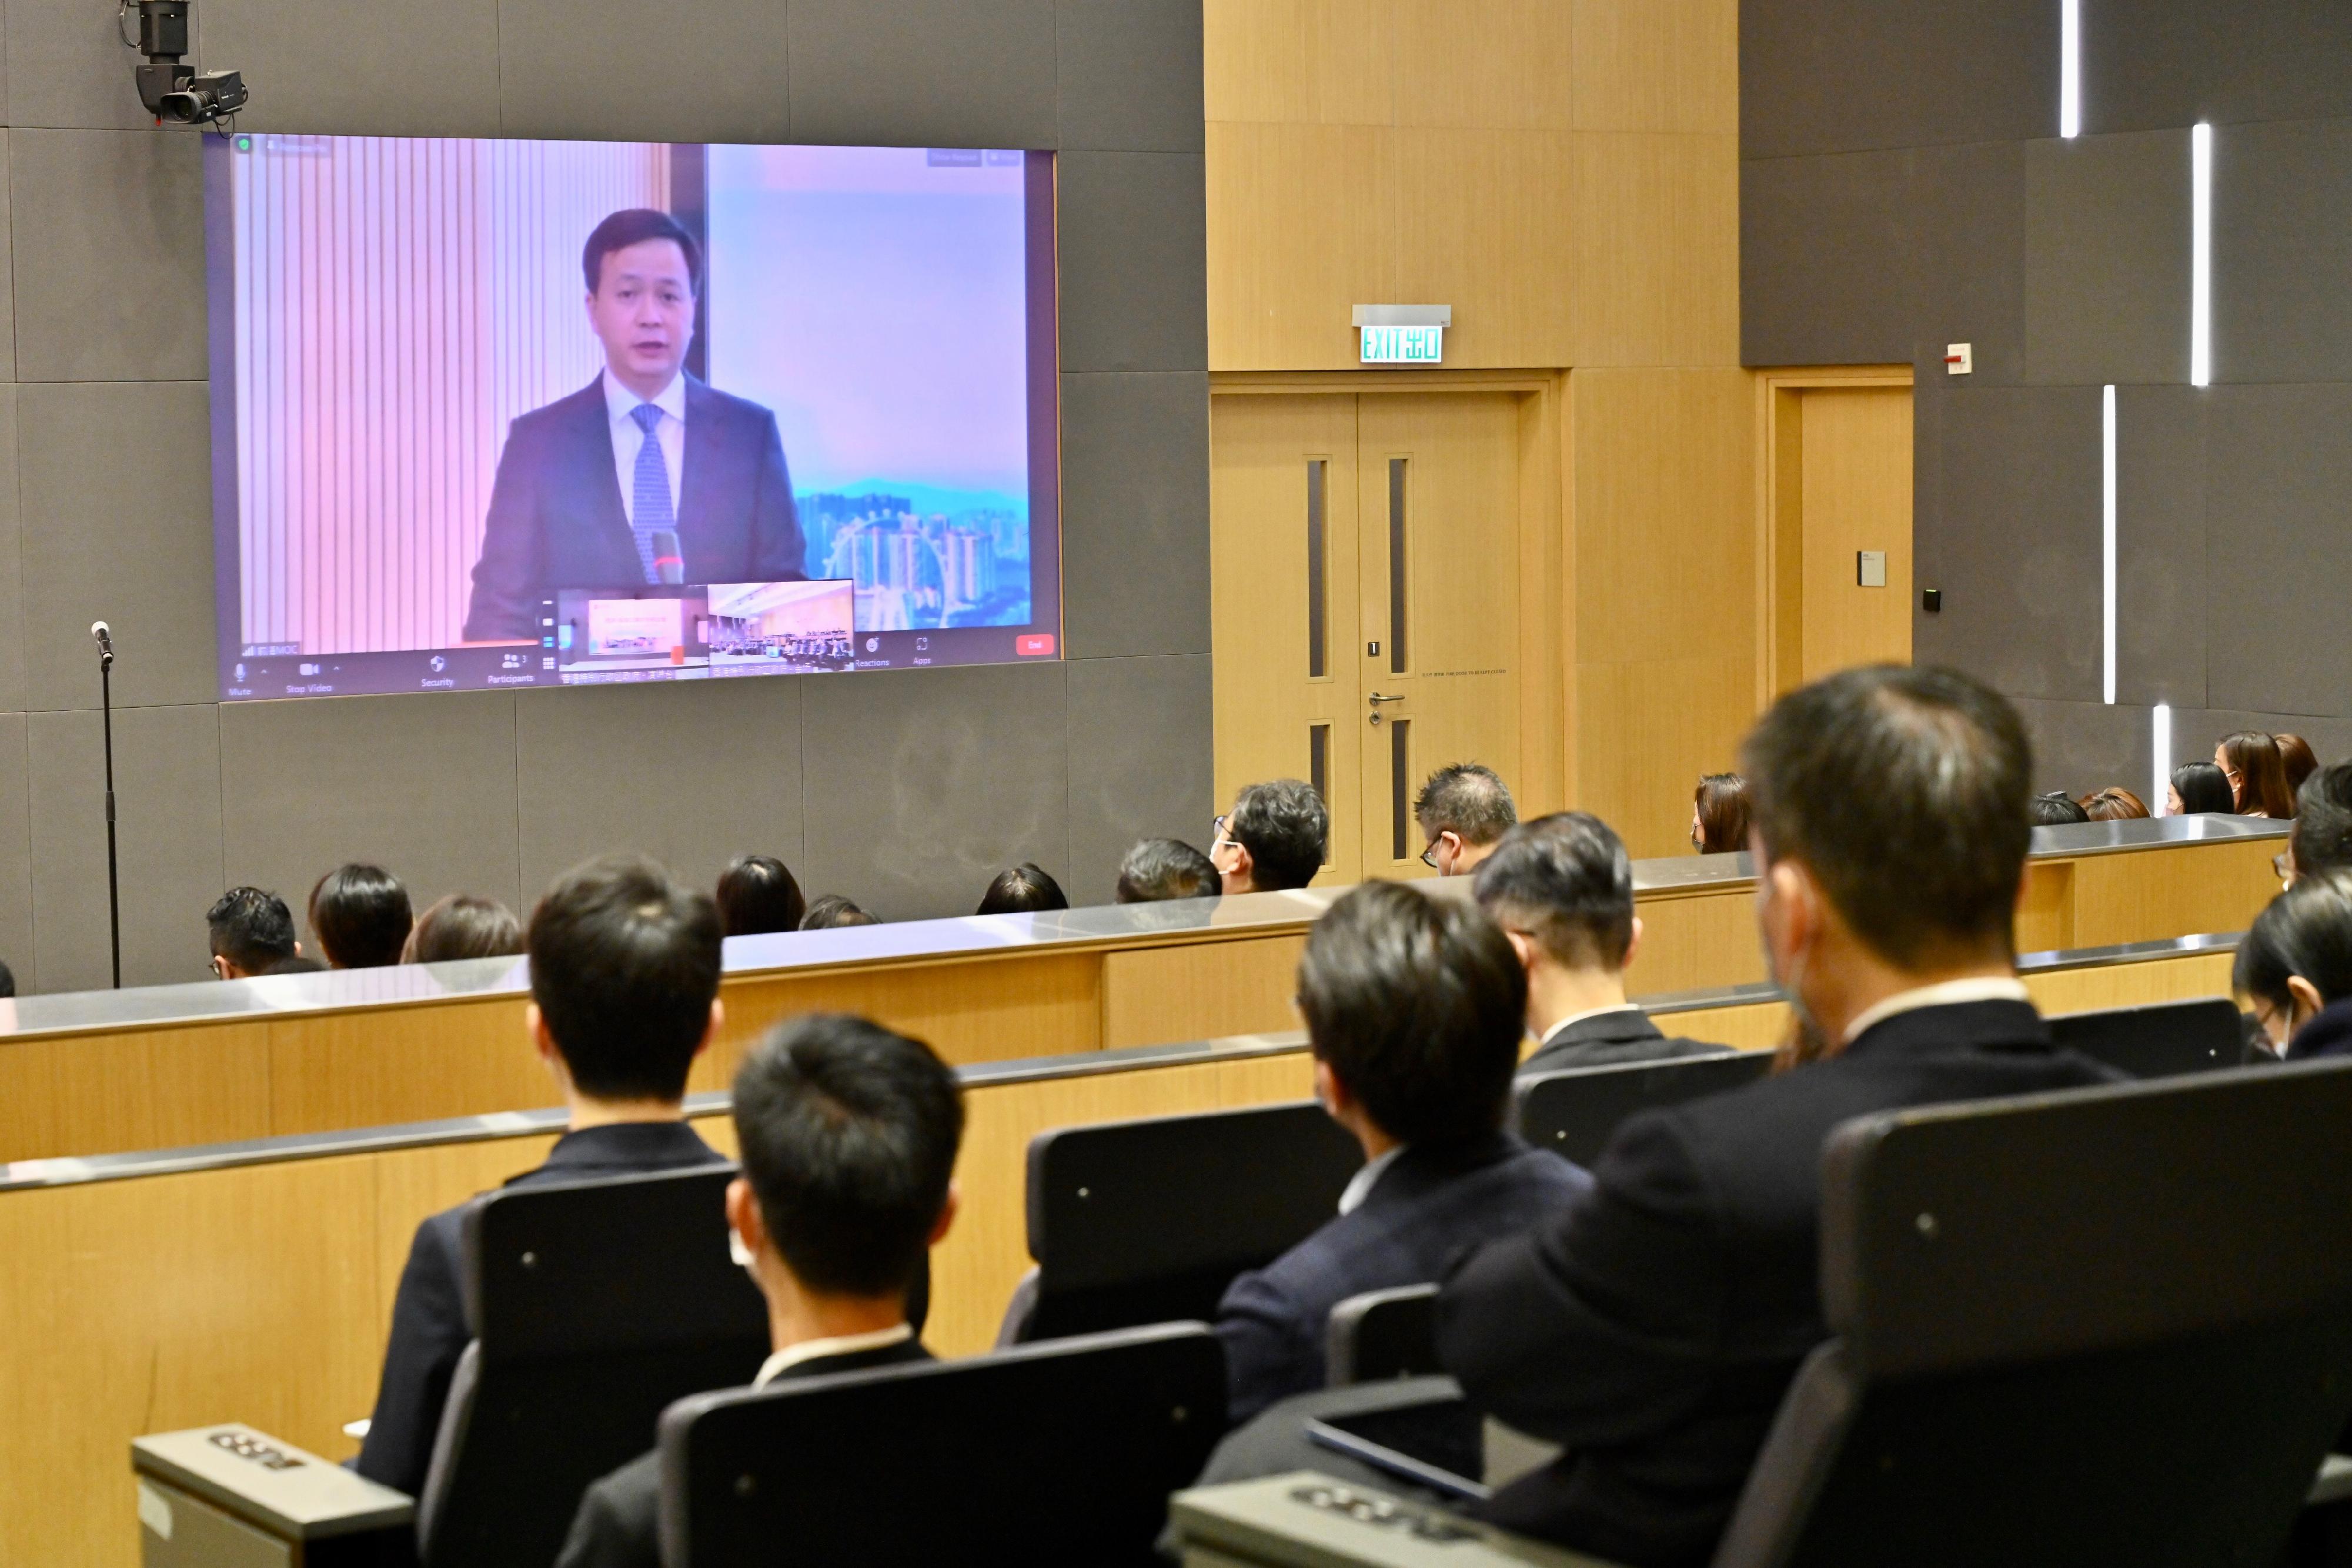 Deputy Executive Director-general of the Qianhai Authority Mr Huang Xiaopeng today (December 15) delivers a speech at the Hong Kong-Qianhai Financial Cooperation Seminar jointly held by the Financial Services and the Treasury Bureau and the Qianhai Authority.
